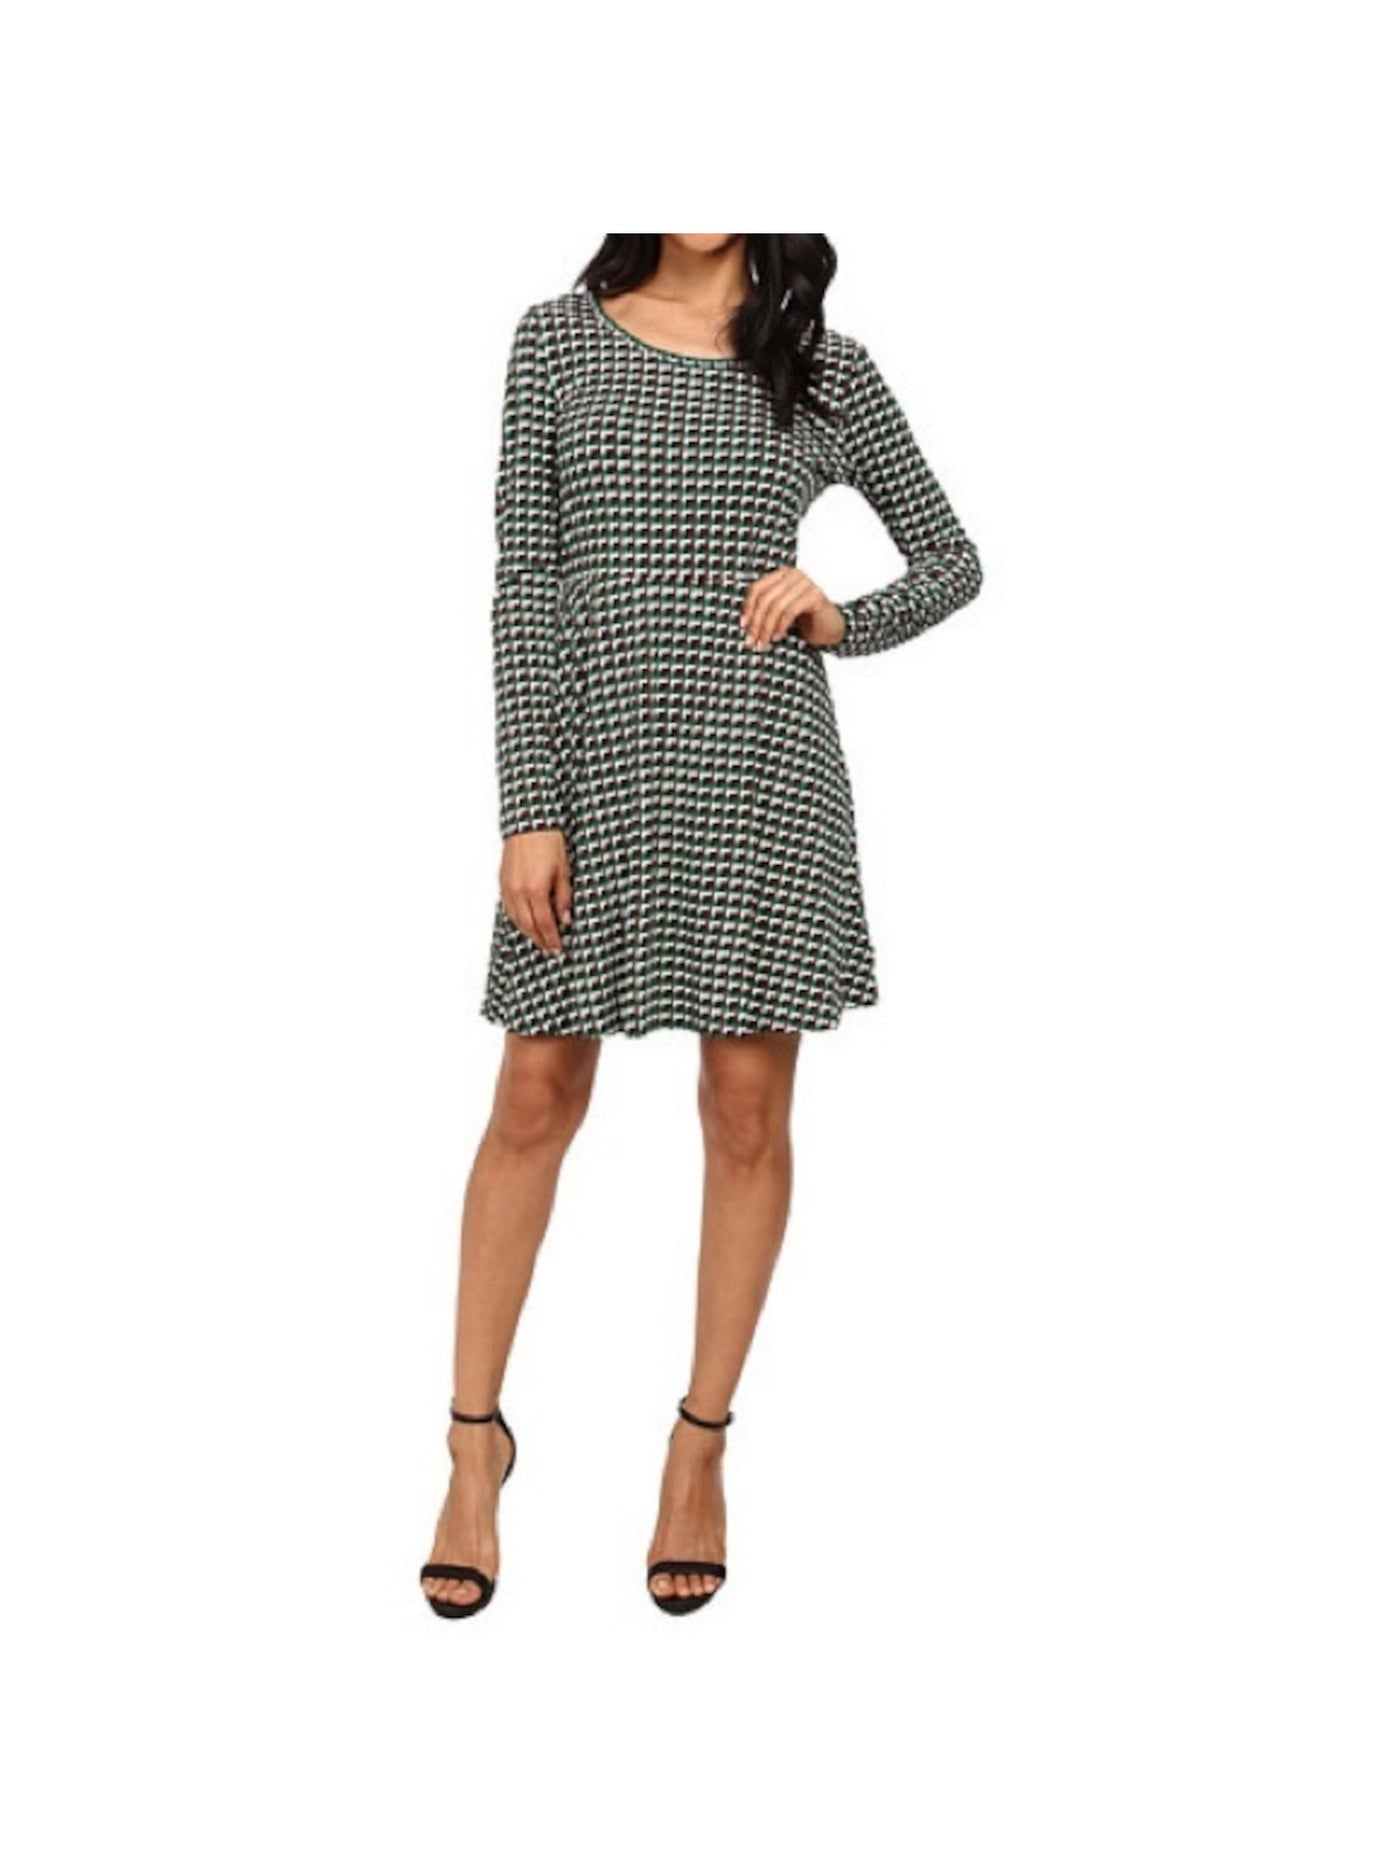 MICHAEL KORS Womens Green Zippered Printed Long Sleeve Scoop Neck Above The Knee Fit + Flare Dress Plus 0X